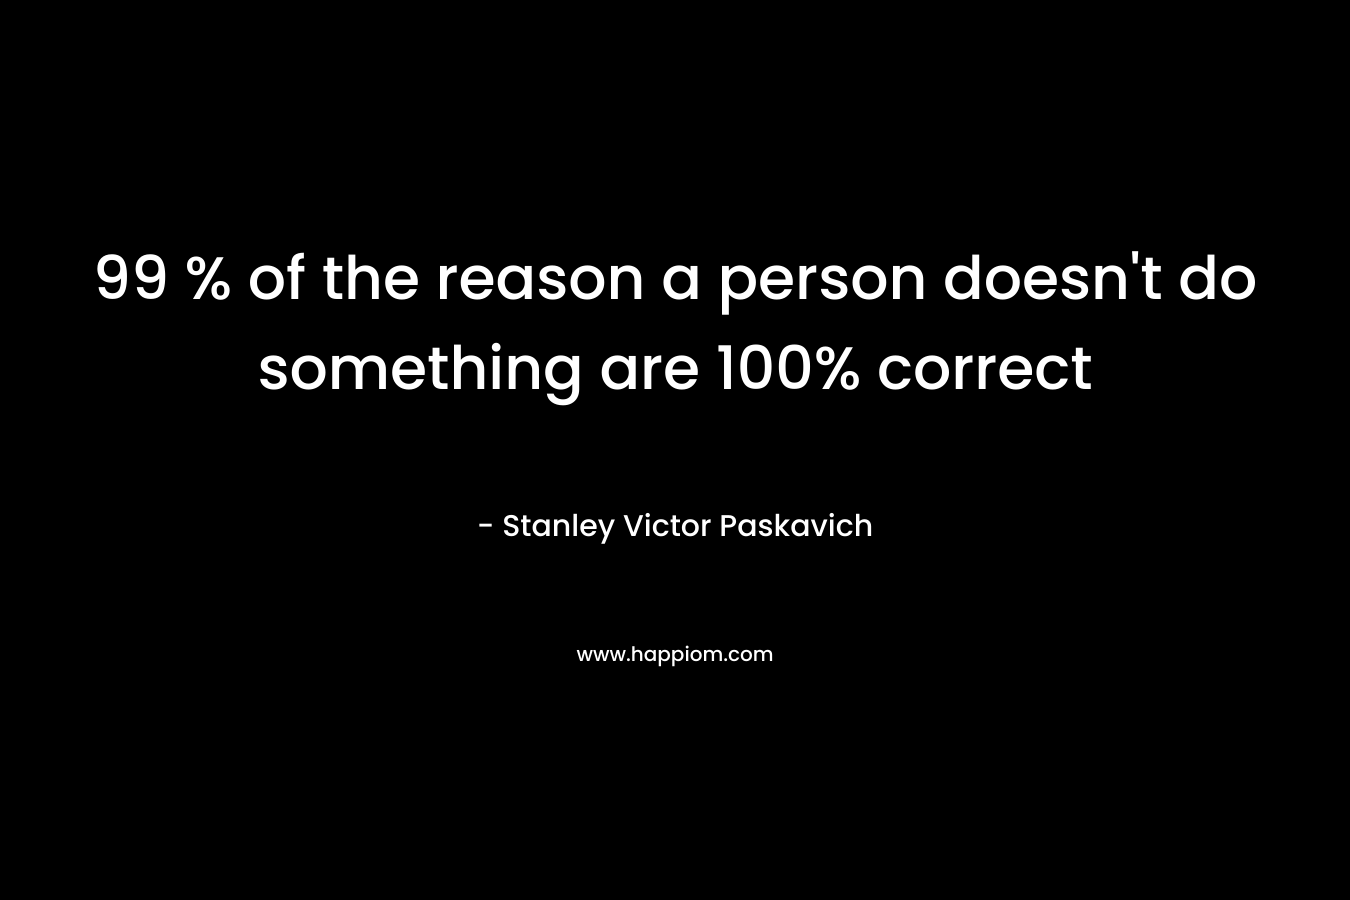 99 % of the reason a person doesn't do something are 100% correct